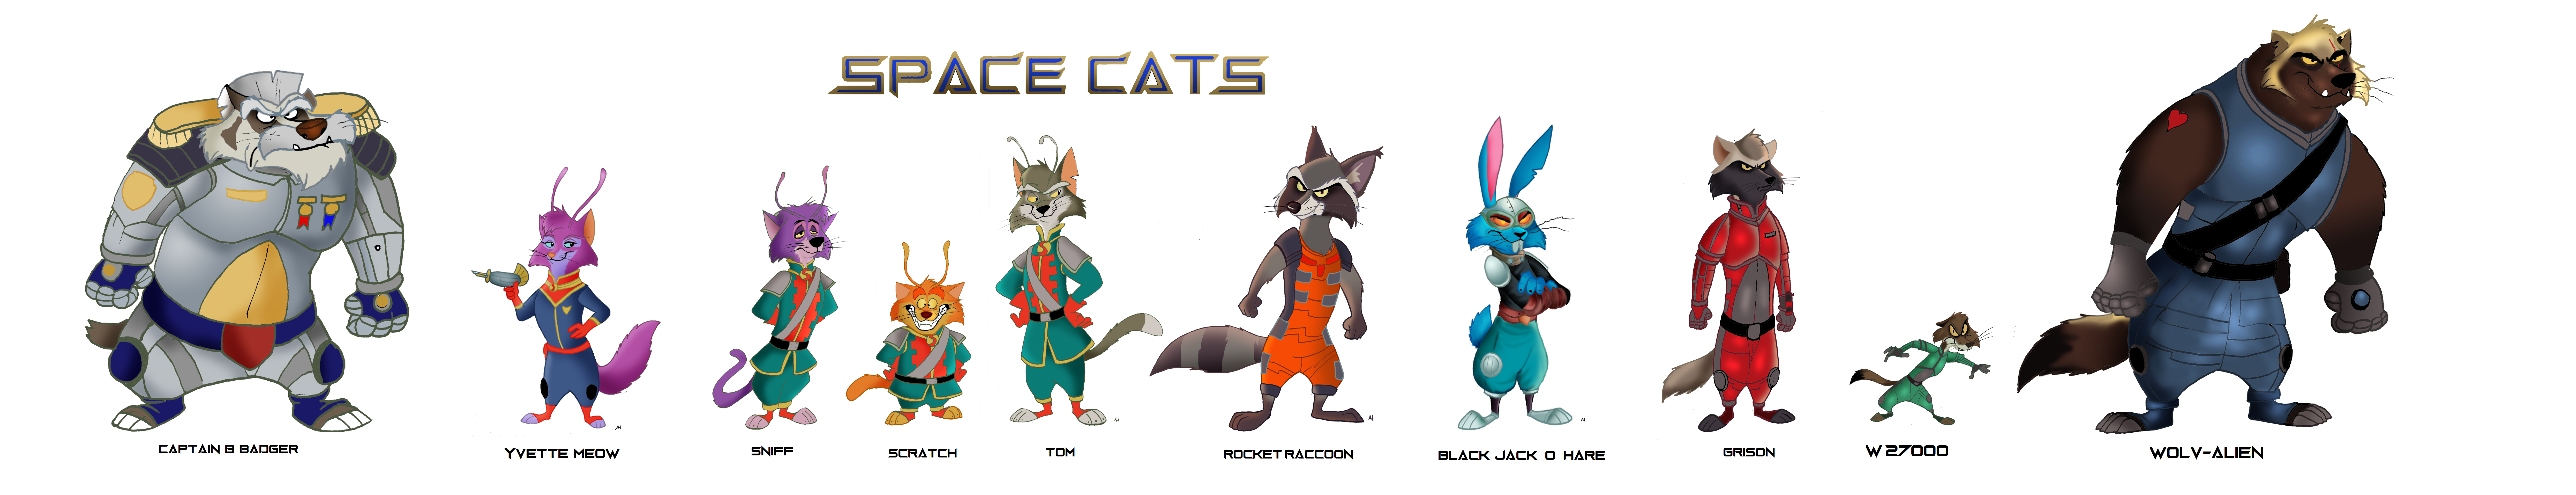 Space Cats size Characters by FairytalesArtist on DeviantArt